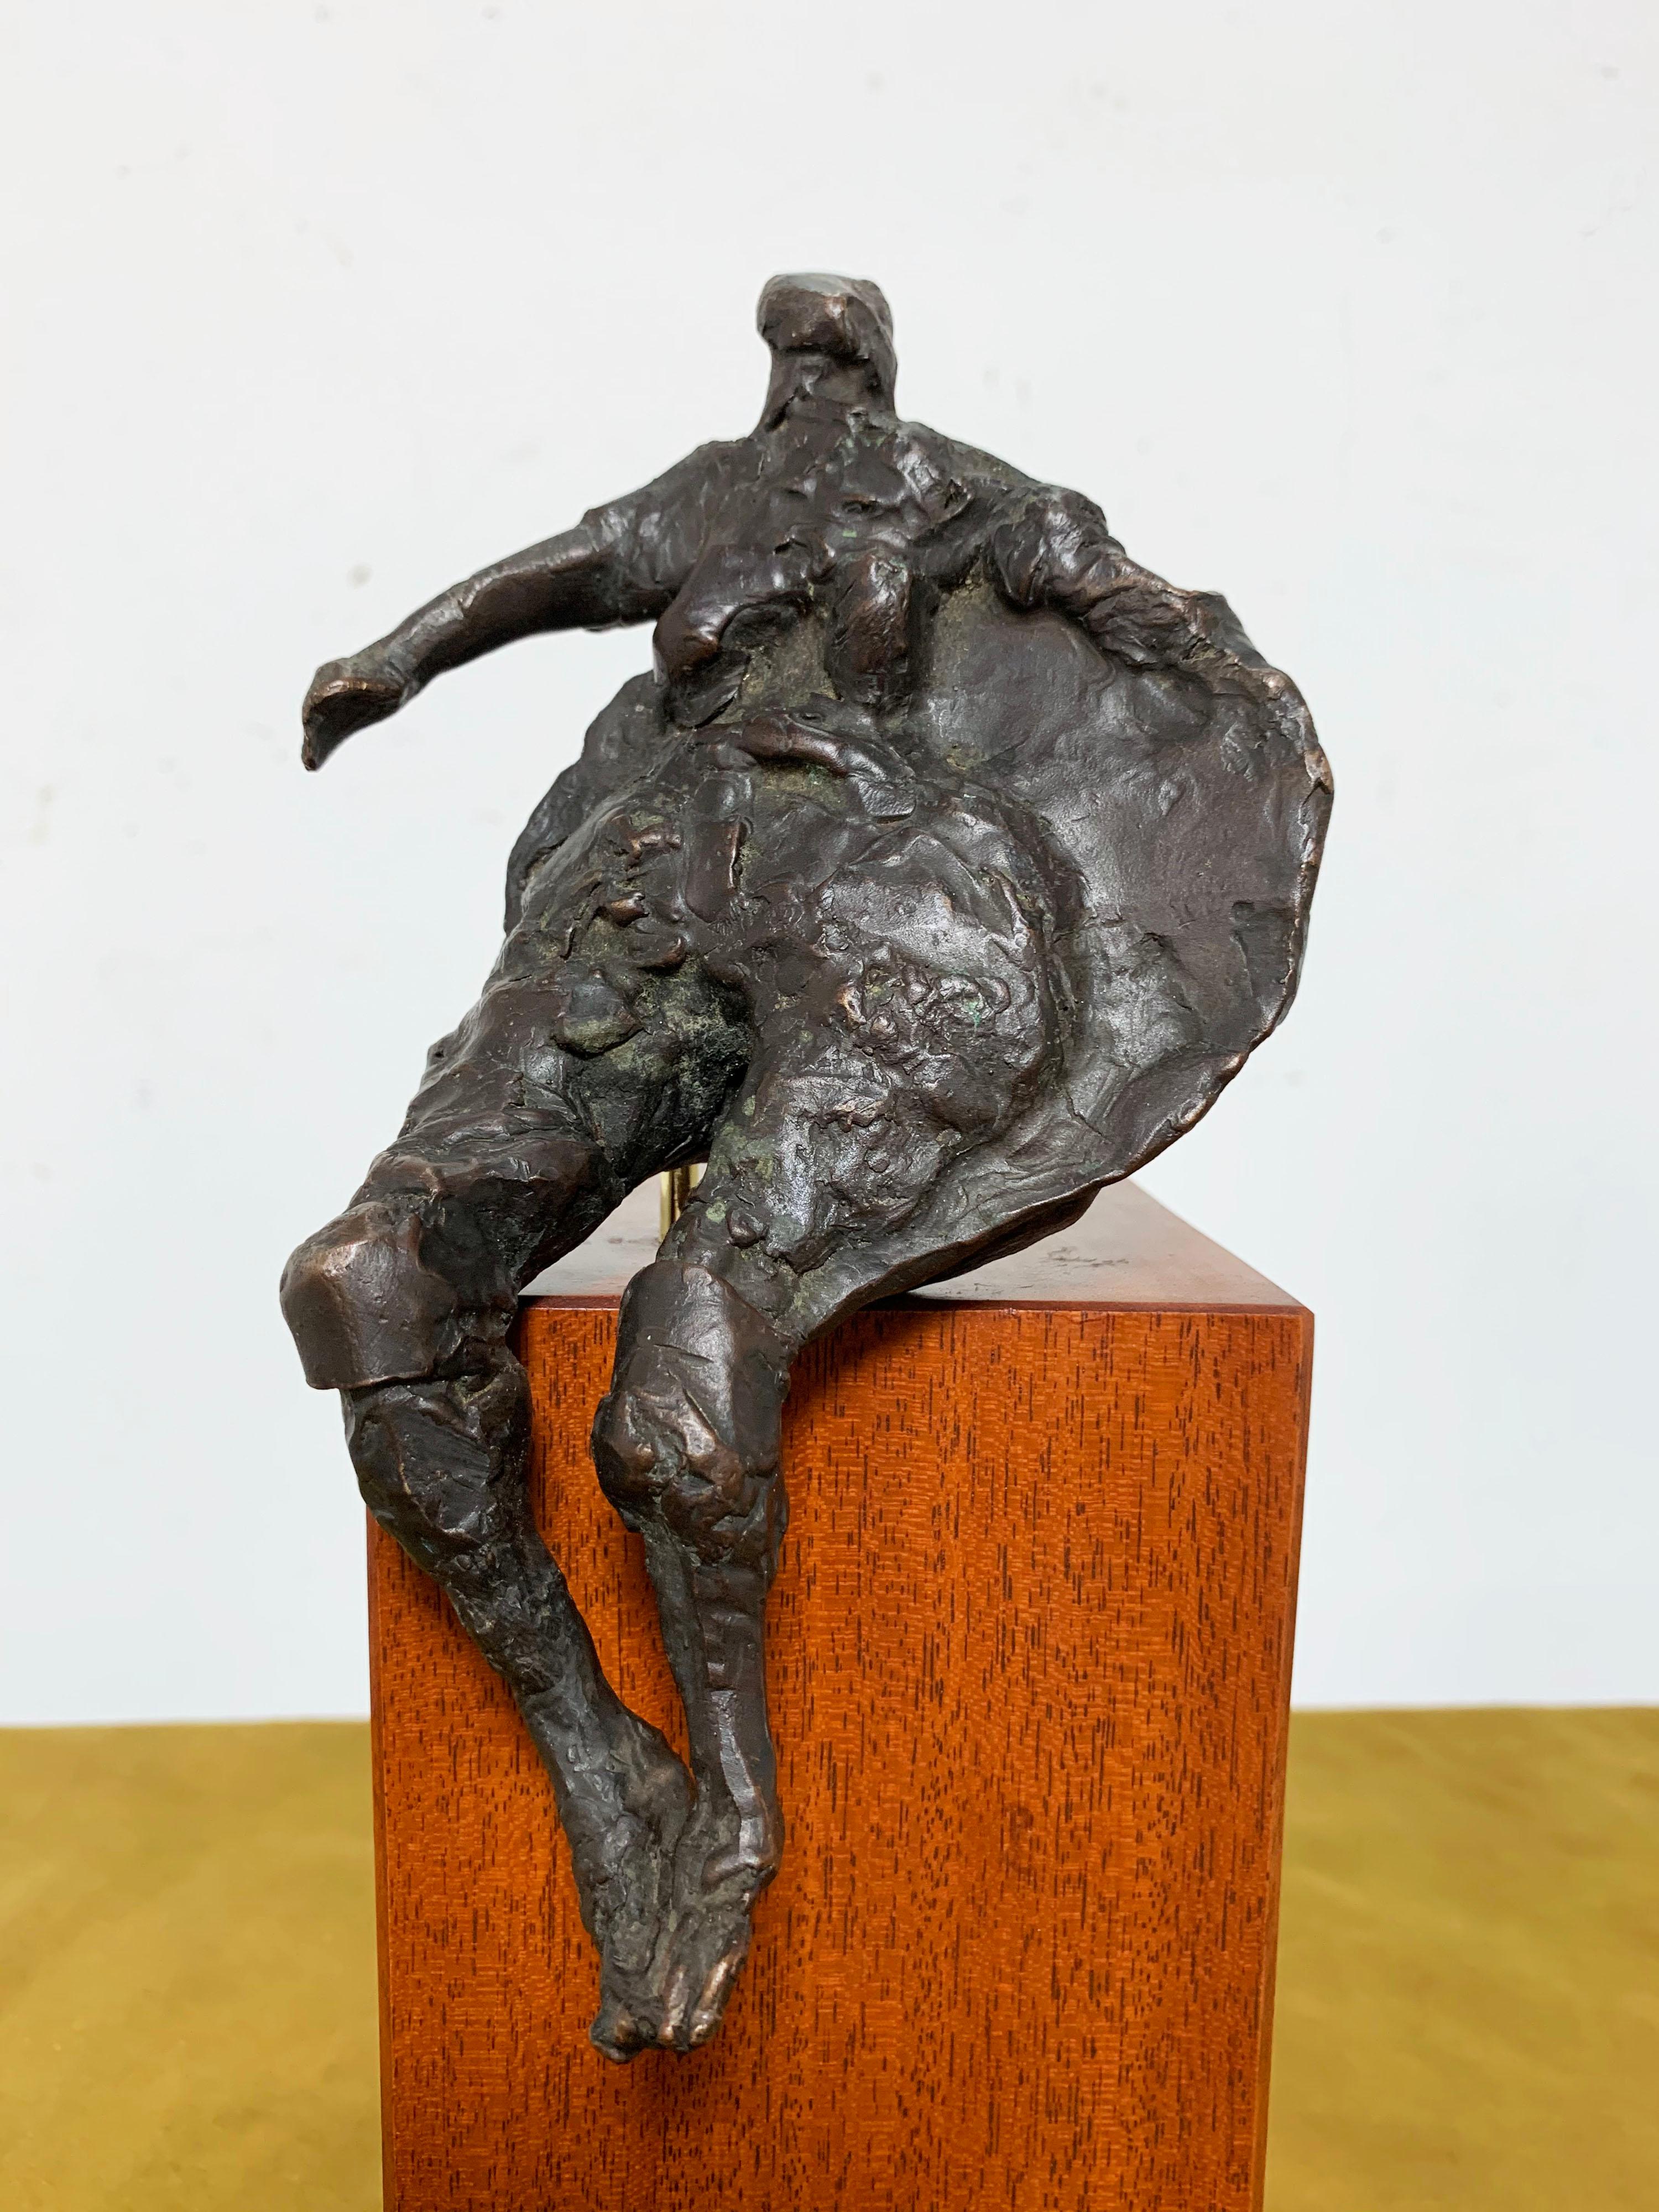 An abstract female figure in bronze by the Expressionist Martin Sumers, circa 1970s. Like his contemporary Willem de Kooning, Sumers found his primary inspiration in a stylized and exaggerated portrayal of the female form. This freeform sculpture,